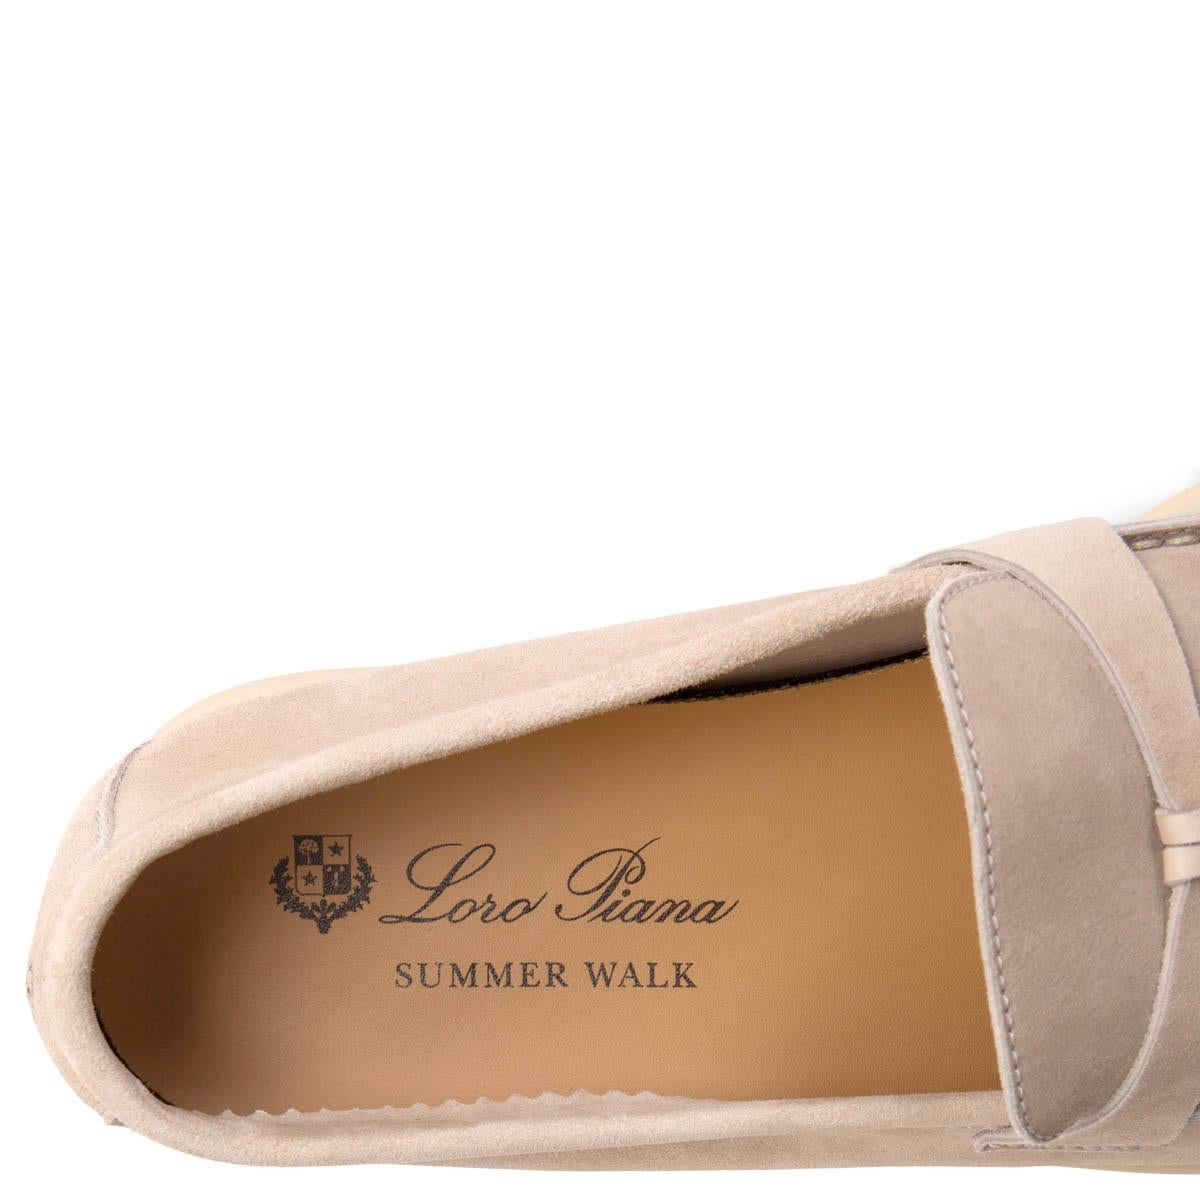 Beige LORO PIANA light sand suede SUMMER CHARMS WALK Loafers Shoes 38